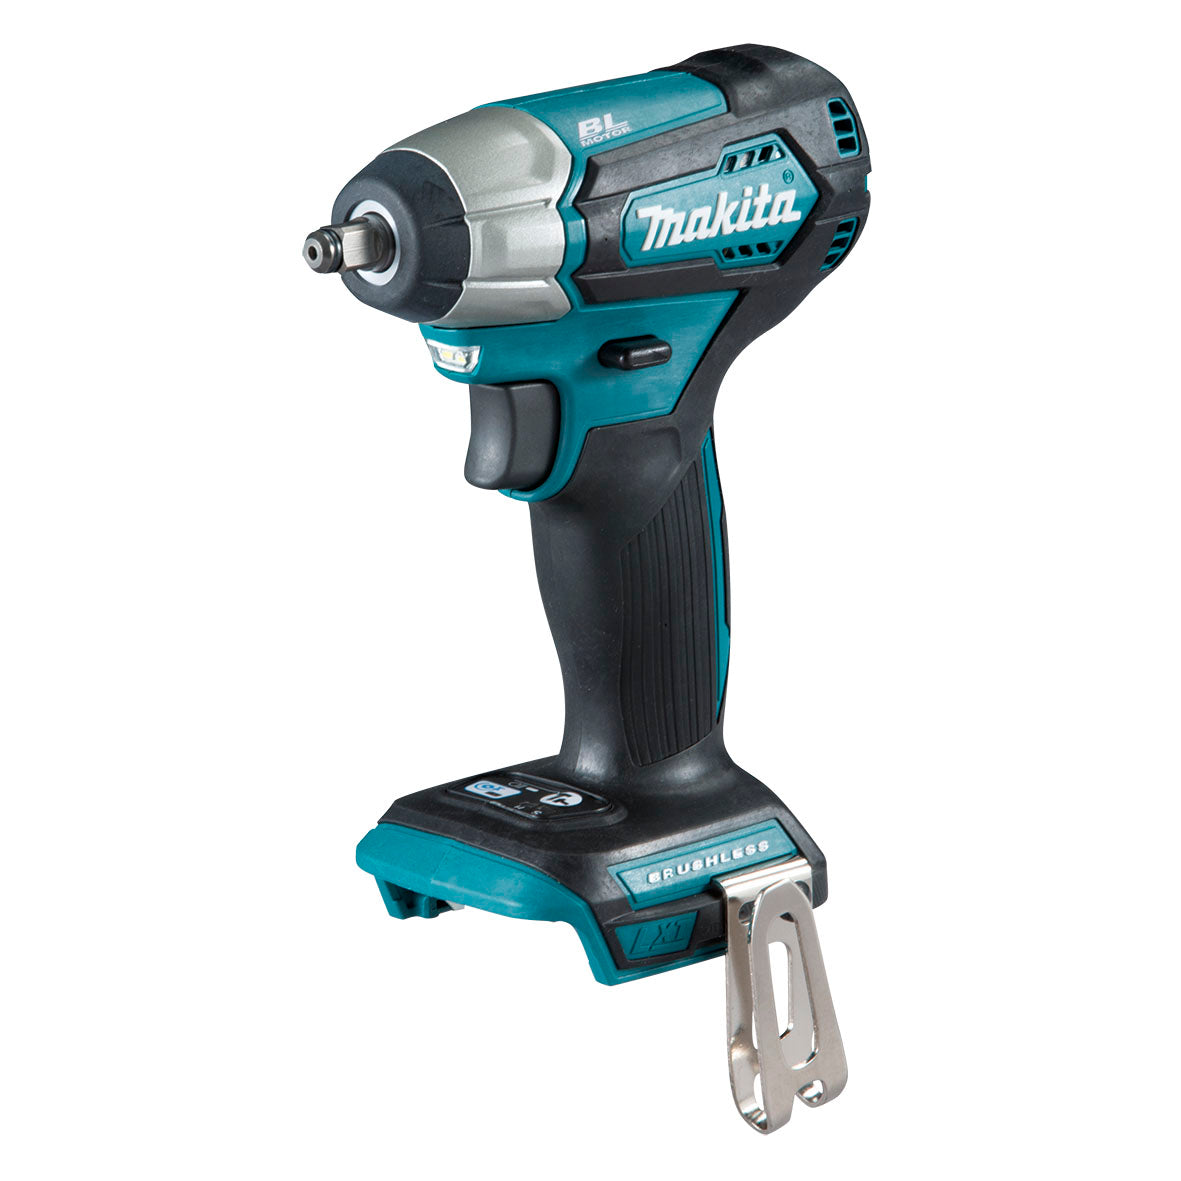 18V 3/8" Brushless Sub-Compact Impact Wrench Bare (Tool Only) DTW180Z by Makita